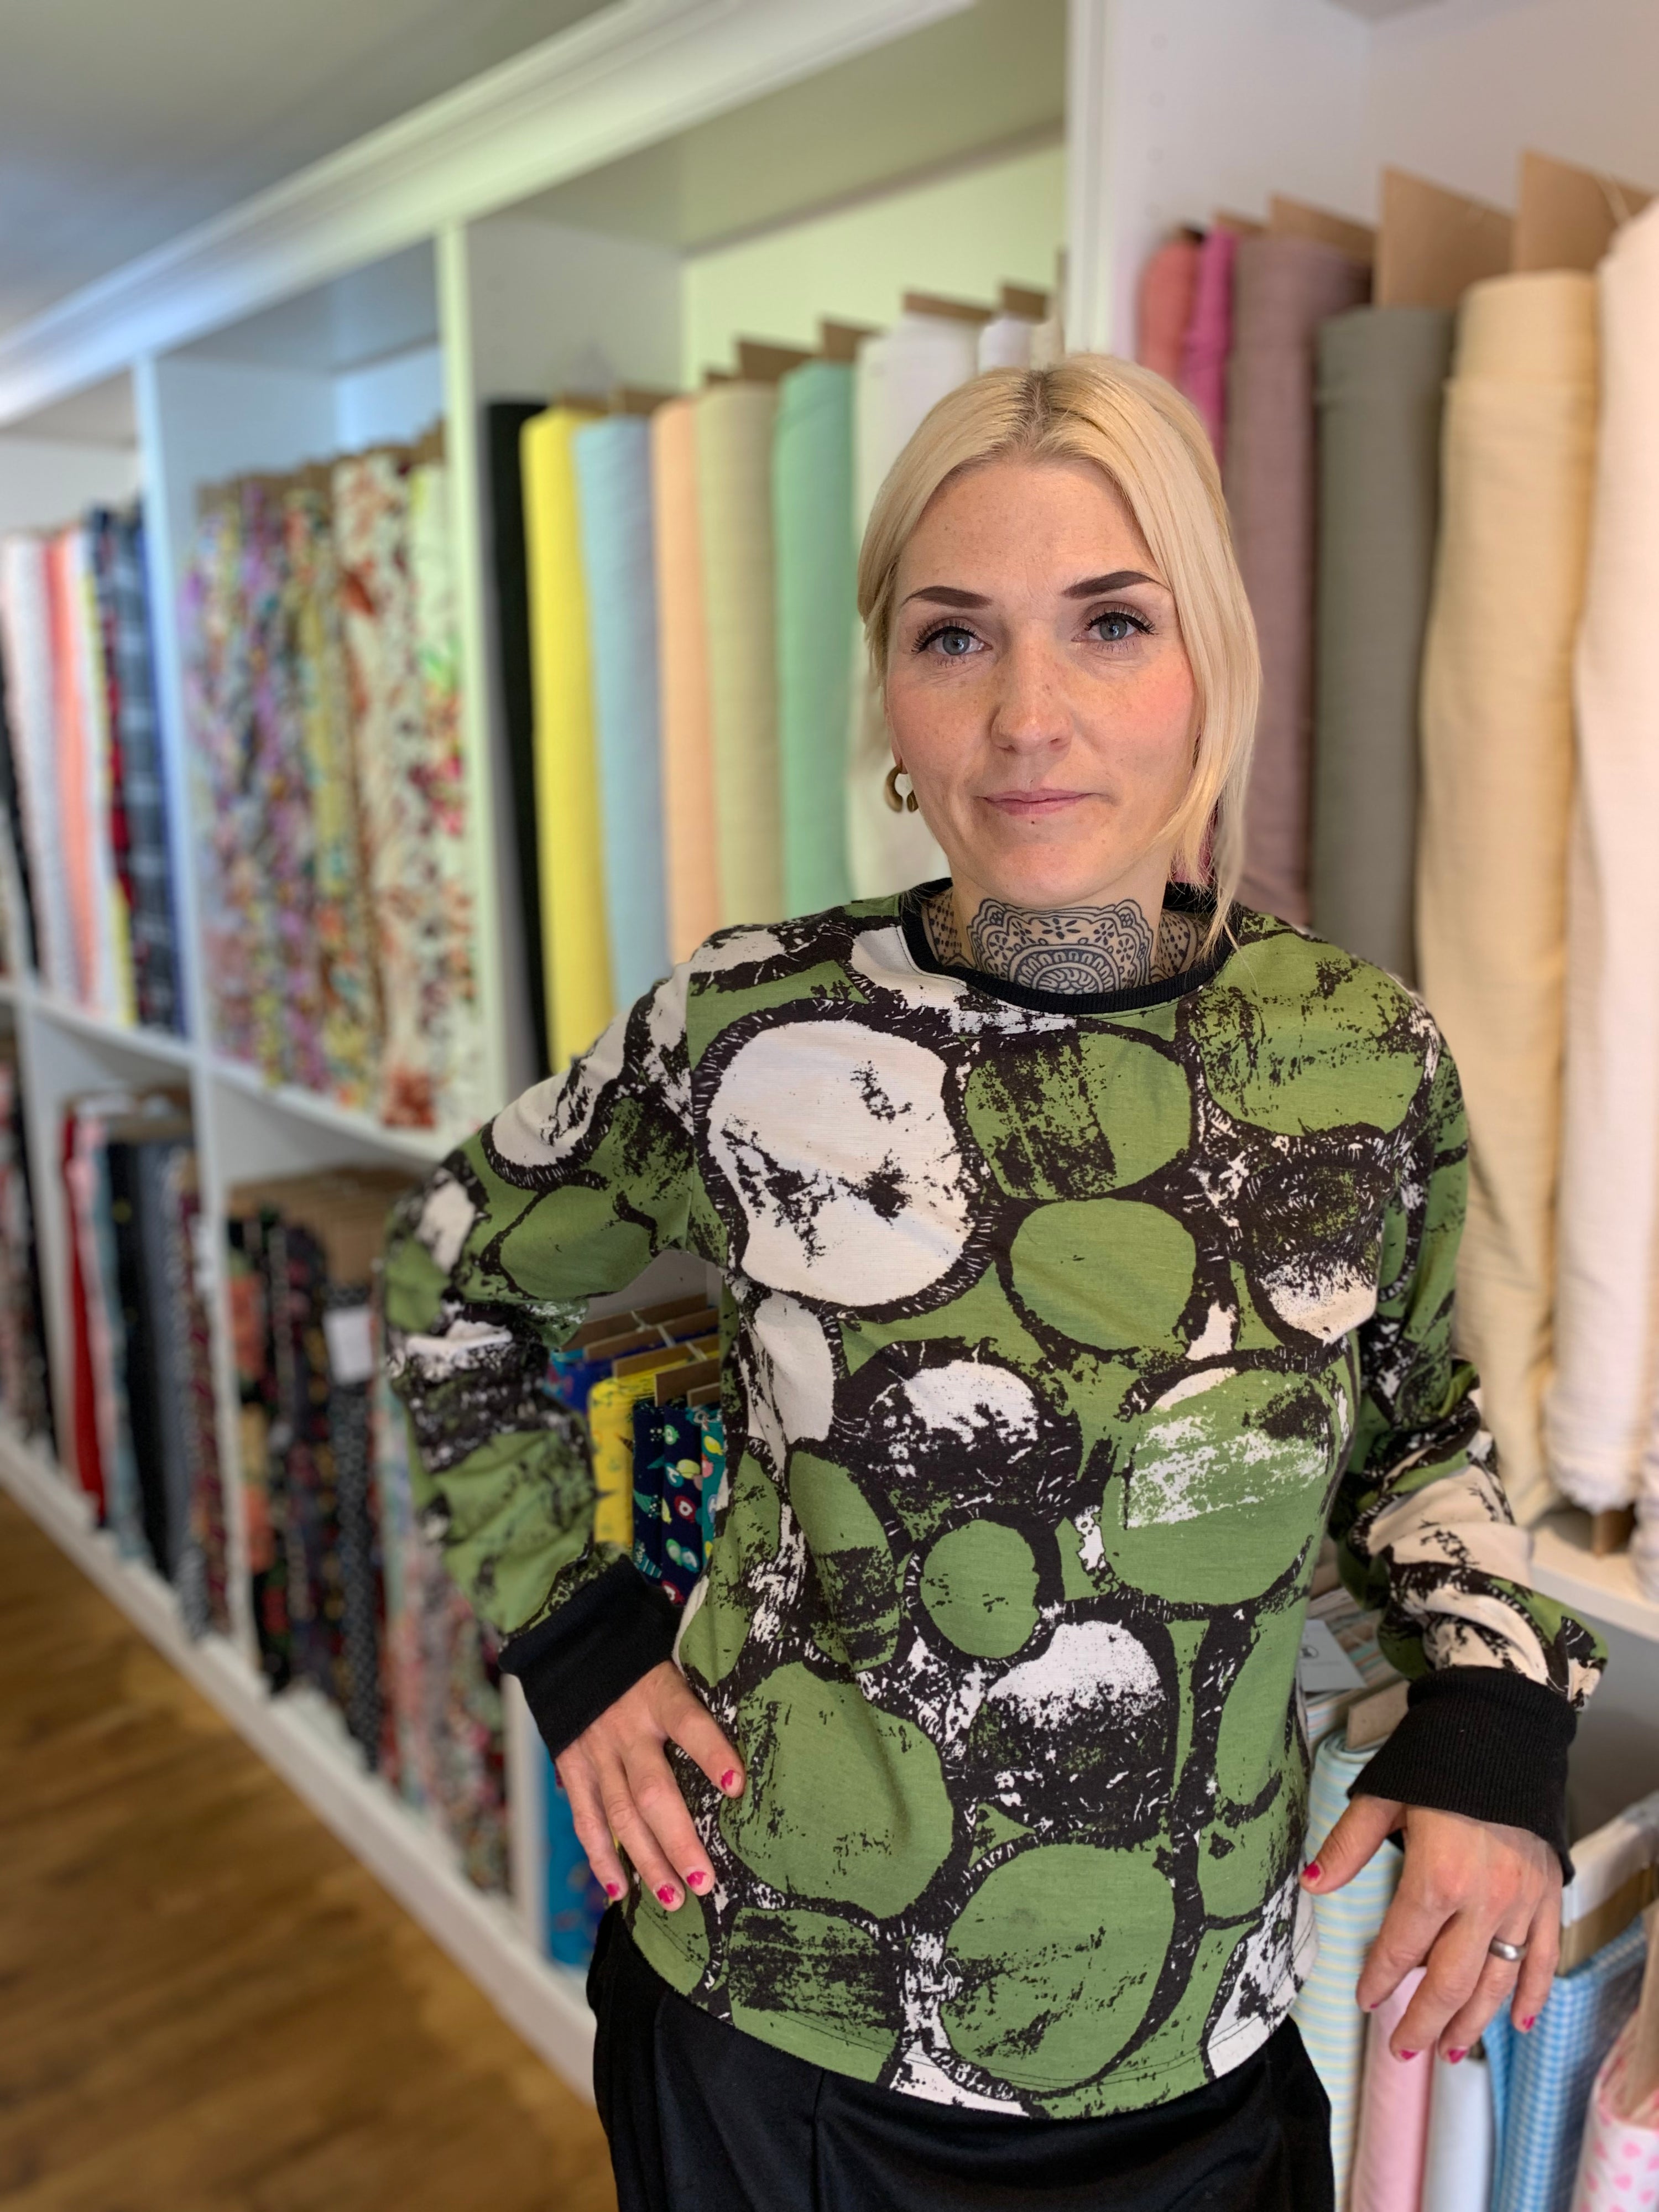 Brighton dressmaking fabric shop offering the largest selection of fabric introduces owner and professional seamstress Päivi